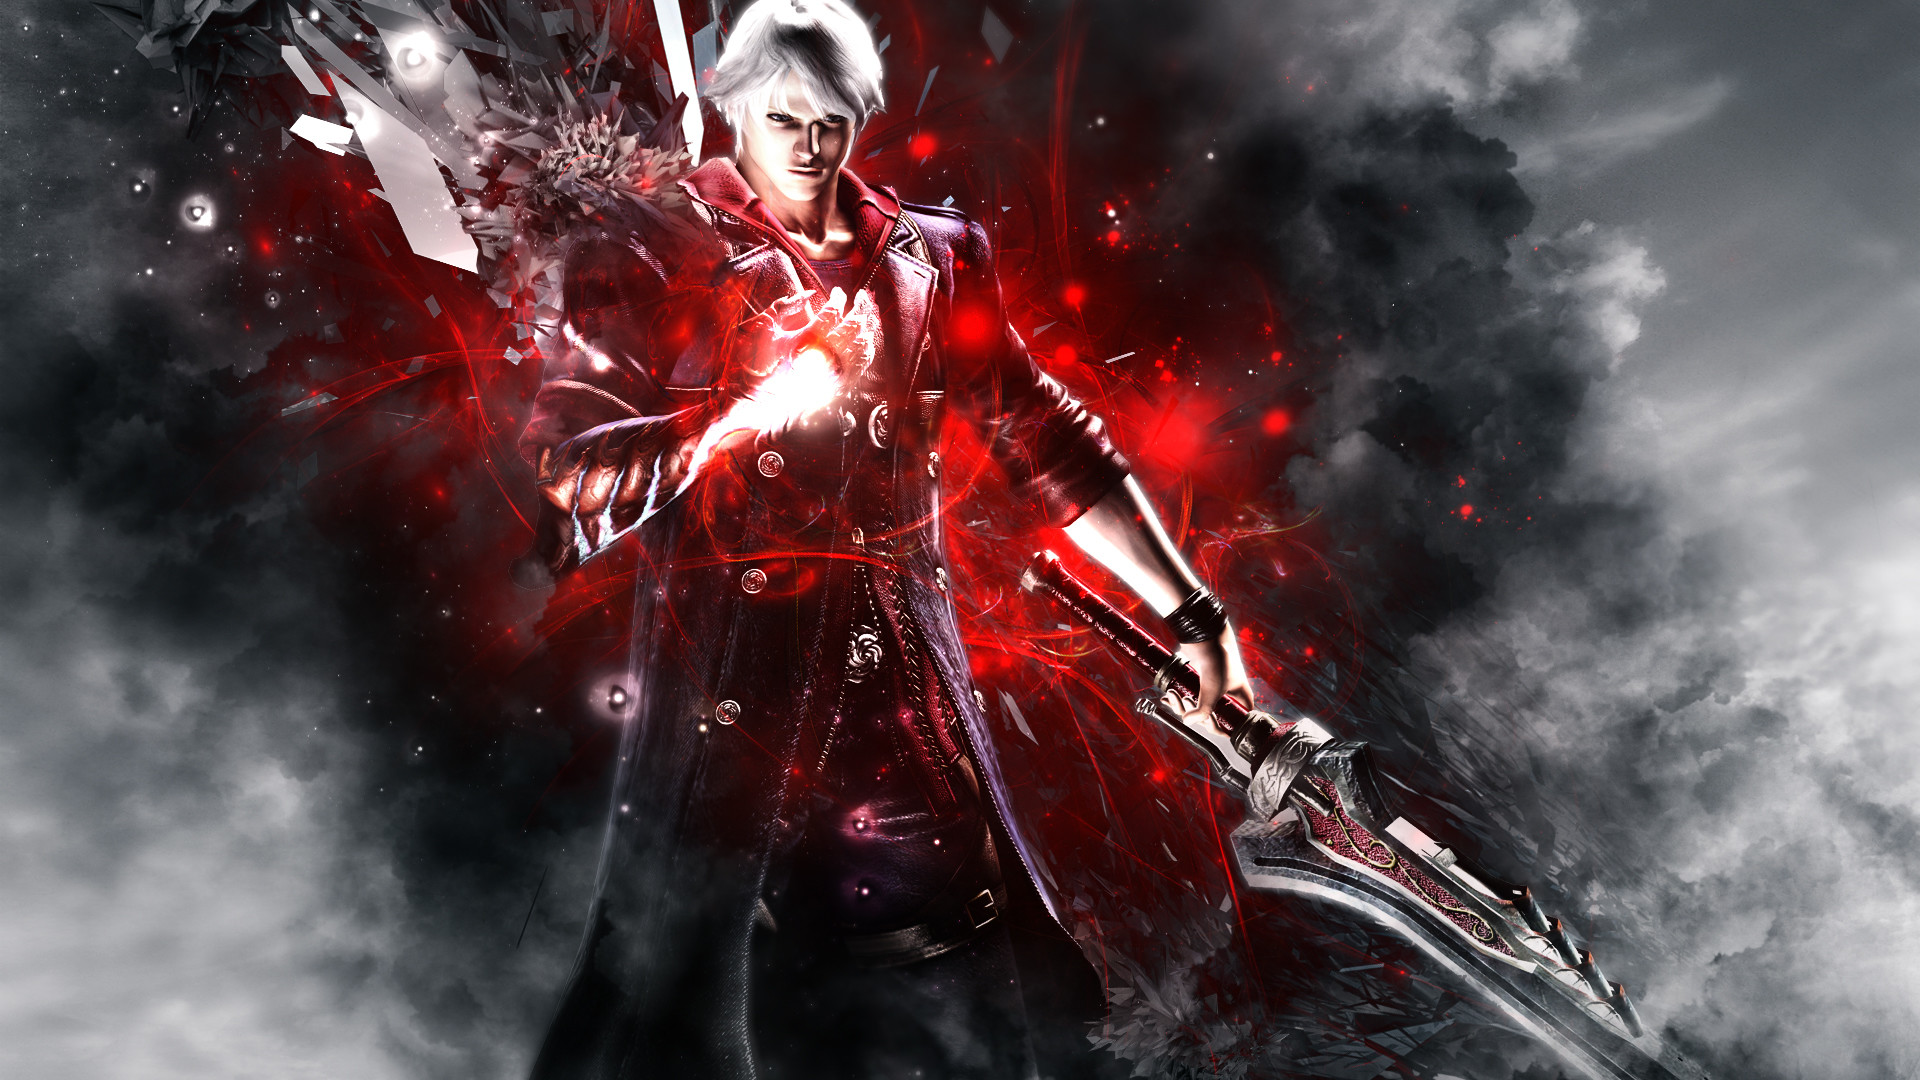 1920x1080 Devil May Cry 4 images nero wallpaper HD wallpaper and background photos